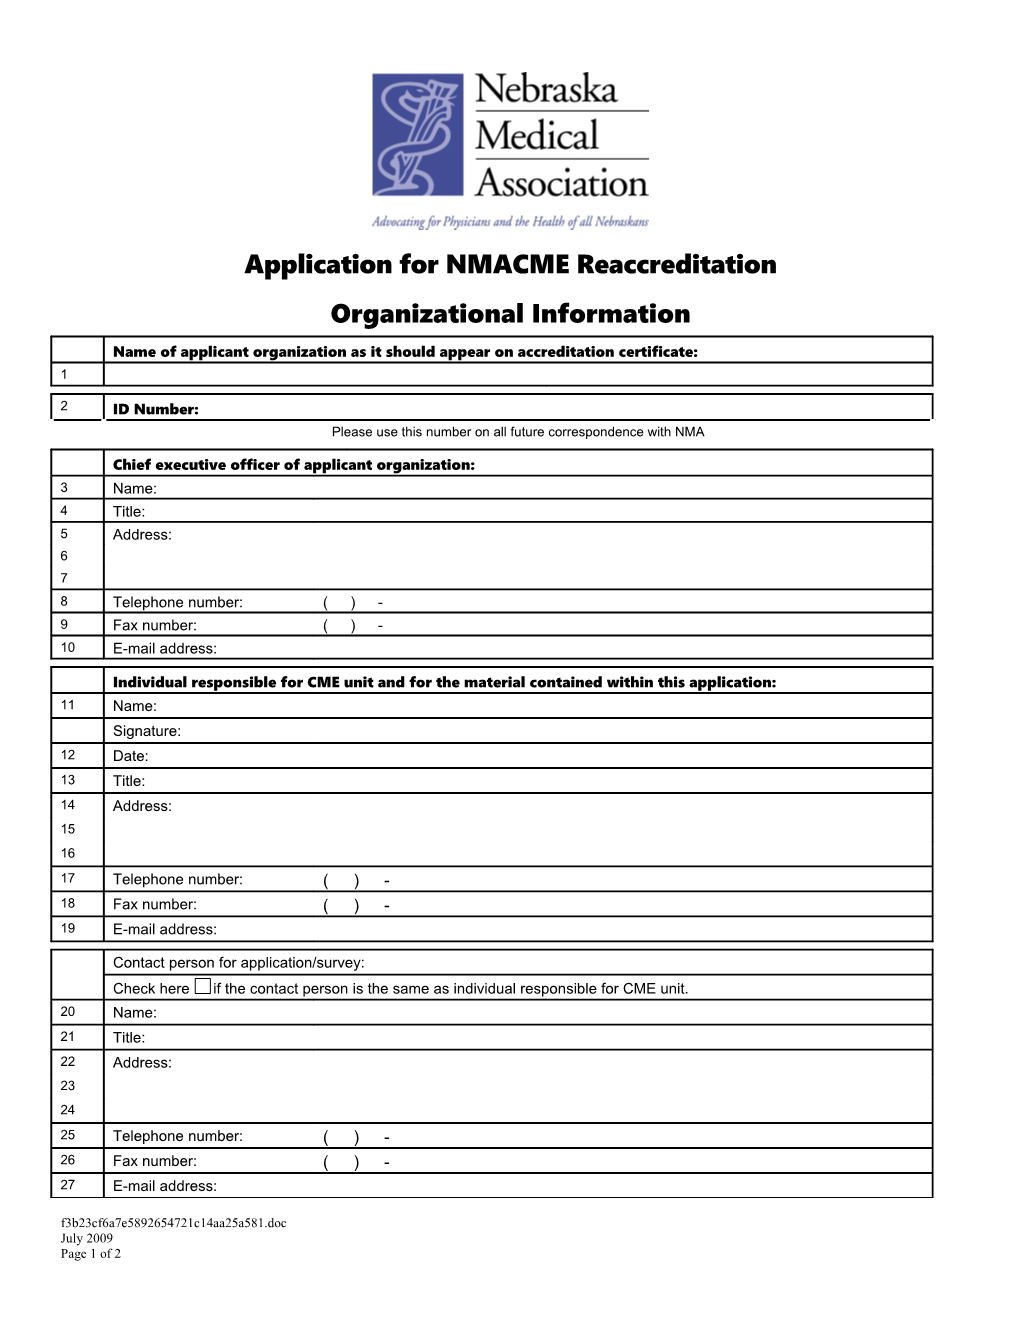 Application for NMACME Reaccreditation